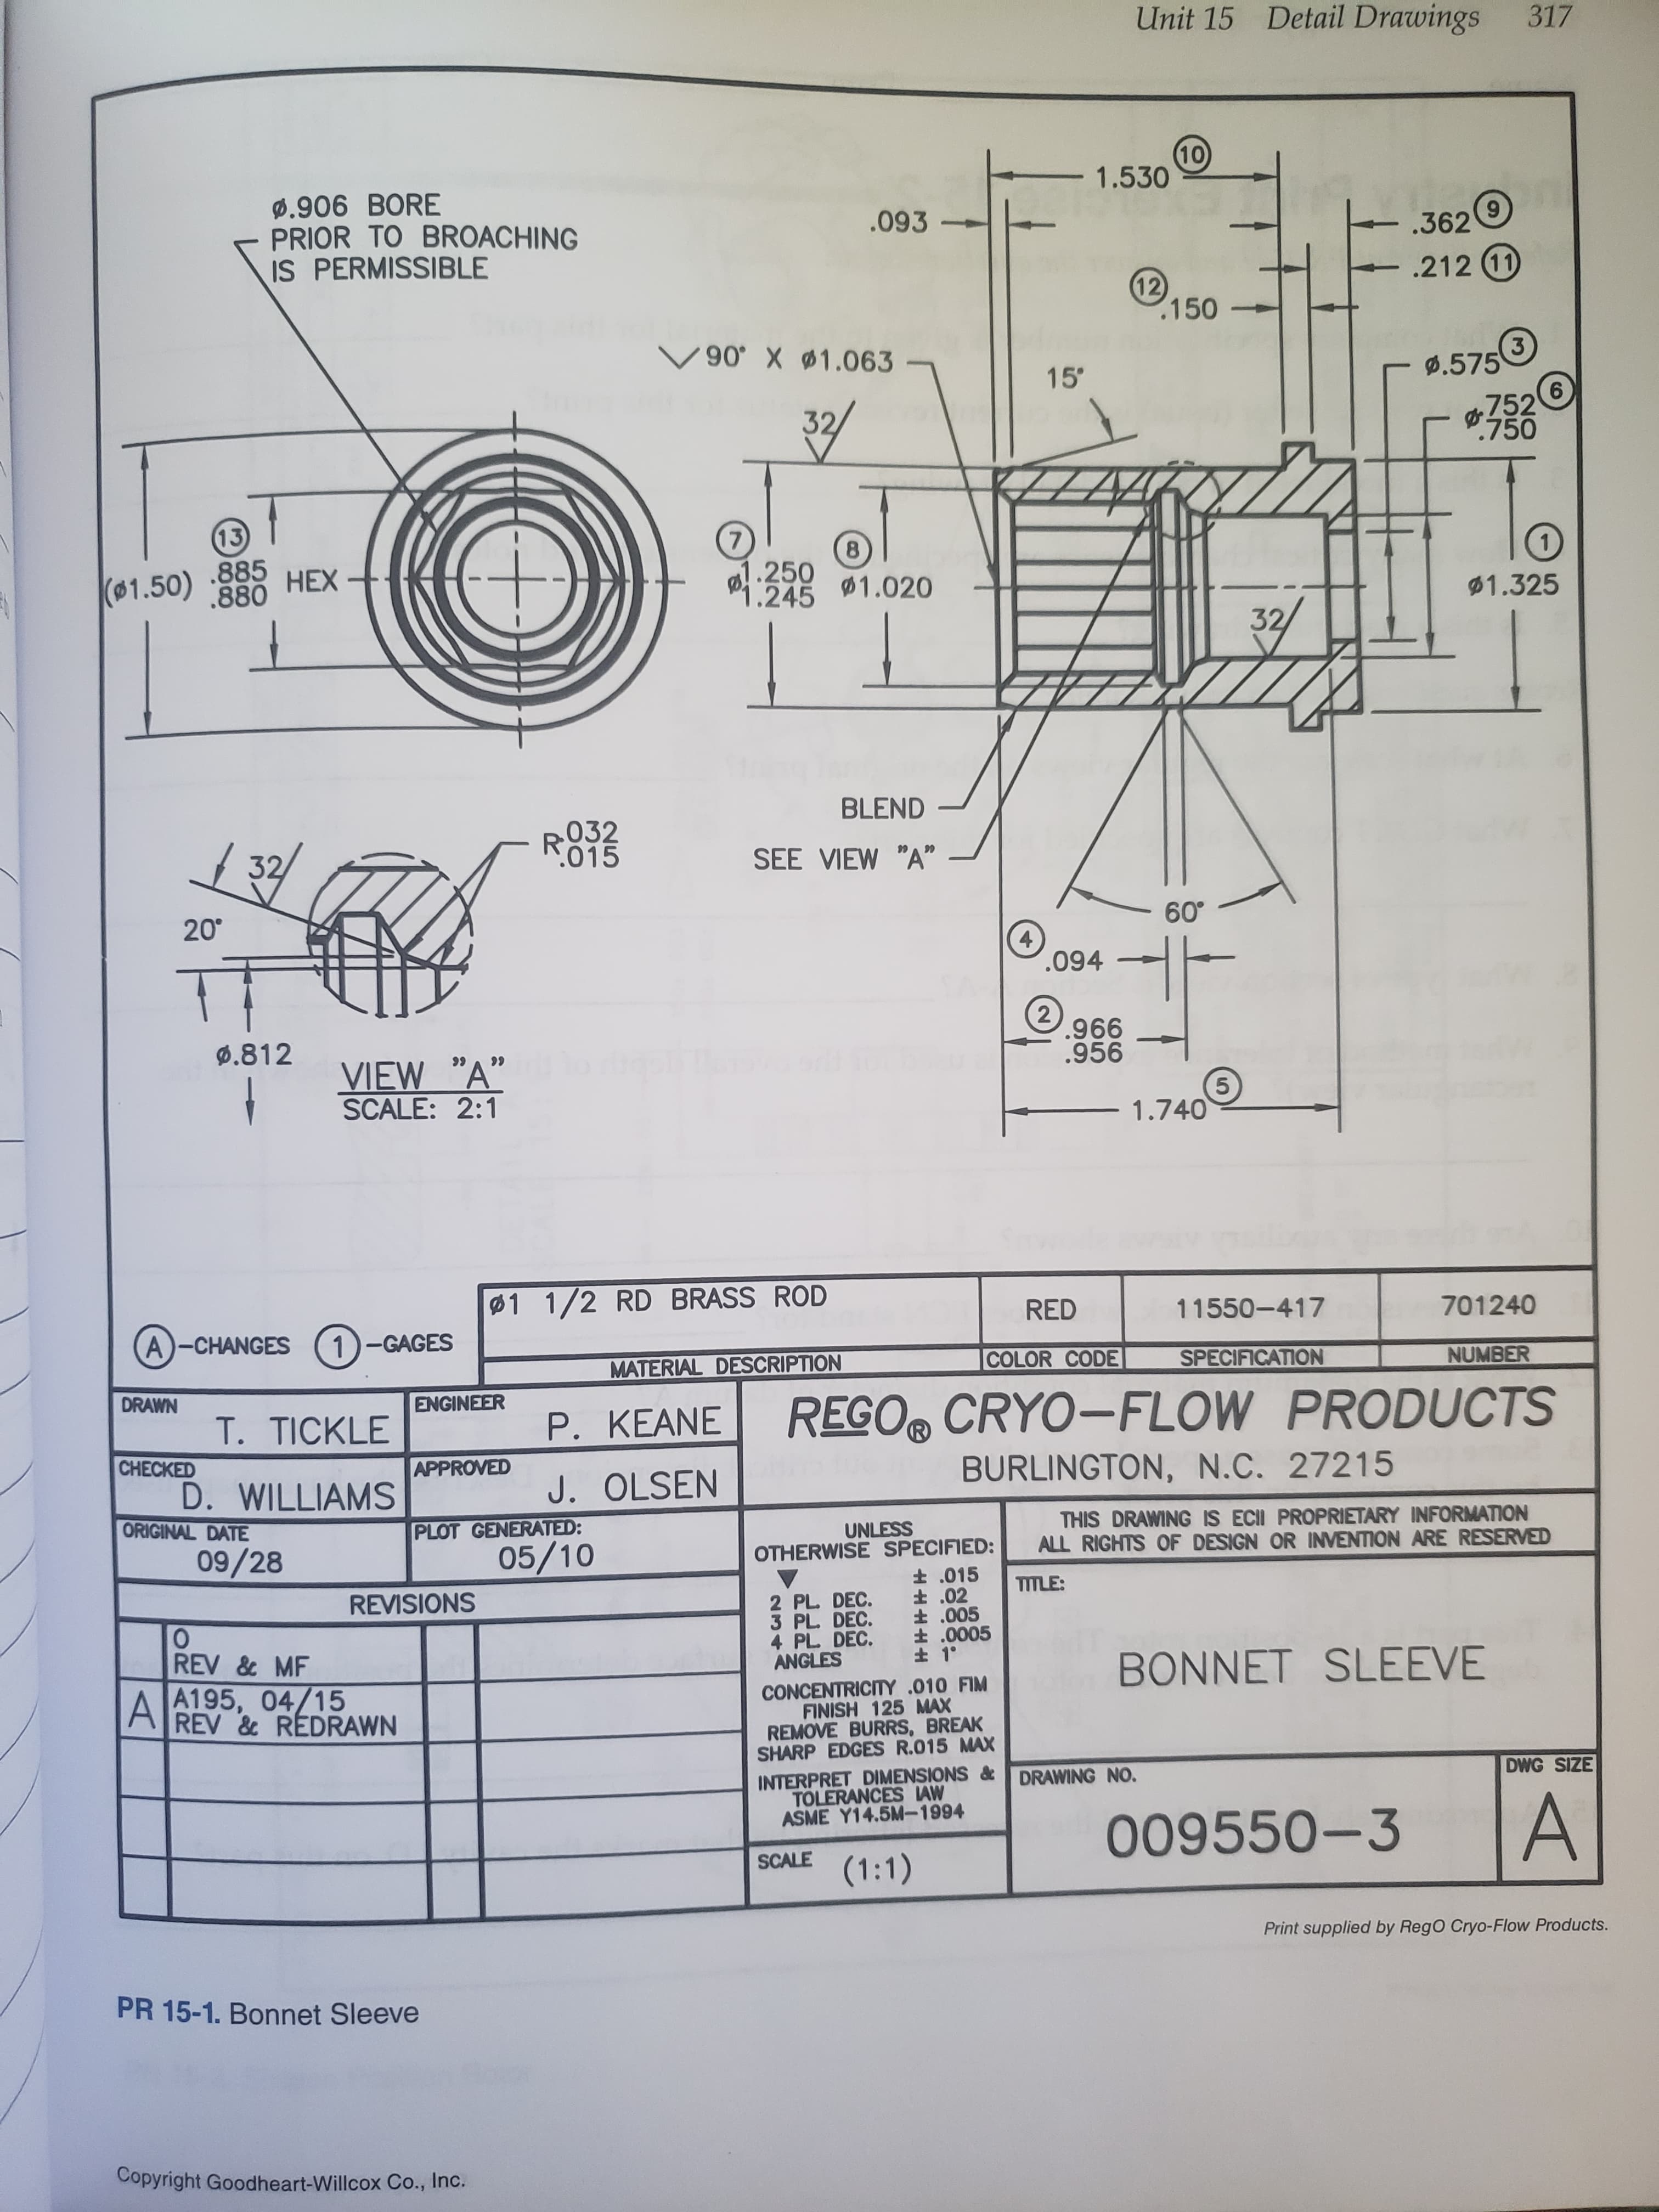 Detail Drawings
Unit 15
317
10
1.530
Ø.906 BORE
PRIOR TO BROACHING
IS PERMISSIBLE
.093
.362
212 (11
12
.150
90 X 1.063
3
ø.575
15
6
32/
752
.750
13
7
8
1.250
1.2451.020
($1.50) 885 HEX
.880
$1.325
32/
BLEND
032
015
SEE VIEW "A"
20°
60
4
.094
TT
2
.966
.956
.812
VIEW "A"
SCALE: 2:1
99
5
1.740
1 1/2 RD BRASS ROD
RED
11550-417
701240
A)-CHANGES
1-GAGES
COLOR CODE
MATERIAL DESCRIPTION
SPECIFICATION
NUMBER
DRAWN
ENGINEER
REGO® CRYO-FLOW PRODUCTS
T. TICKLE
P.KEANE
CHECKED
APPROVED
BURLINGTON, N.C. 27215
D. WILLIAMS
J. OLSEN
ORIGINAL DATE
PLOT GENERATED:
THIS DRAWING IS ECII PROPRIETARY INFORMATION
ALL RIGHTS OF DESIGN OR INVENTION ARE RESERVED
UNLESS
OTHERWISE SPECIFIED:
09/28
05/10
t .015
t 02
t .005
t .0005
t 1
TIMLE:
REVISIONS
2 PL DEC.
3 PL DEC.
4 PL DEC.
ANGLES
REV & MF
A195, 04/15
REV&REDRAWN
BONNET SLEEVE
CONCENTRICITY .010 FIM
FINISH 125 MAX
REMOVE BURRS, BREAK
SHARP EDGES R.015 MAX
INTERPRET DIMENSIONS &
TOLERANCES AW
ASME Y14.5M-1994
DWG SIZE
DRAWING NO.
A
009550-3
SCALE
(1:1)
Print supplied by RegO Cryo-Flow Products.
PR 15-1. Bonnet Sleeve
Copyright Goodheart-Willcox Co., Inc.
